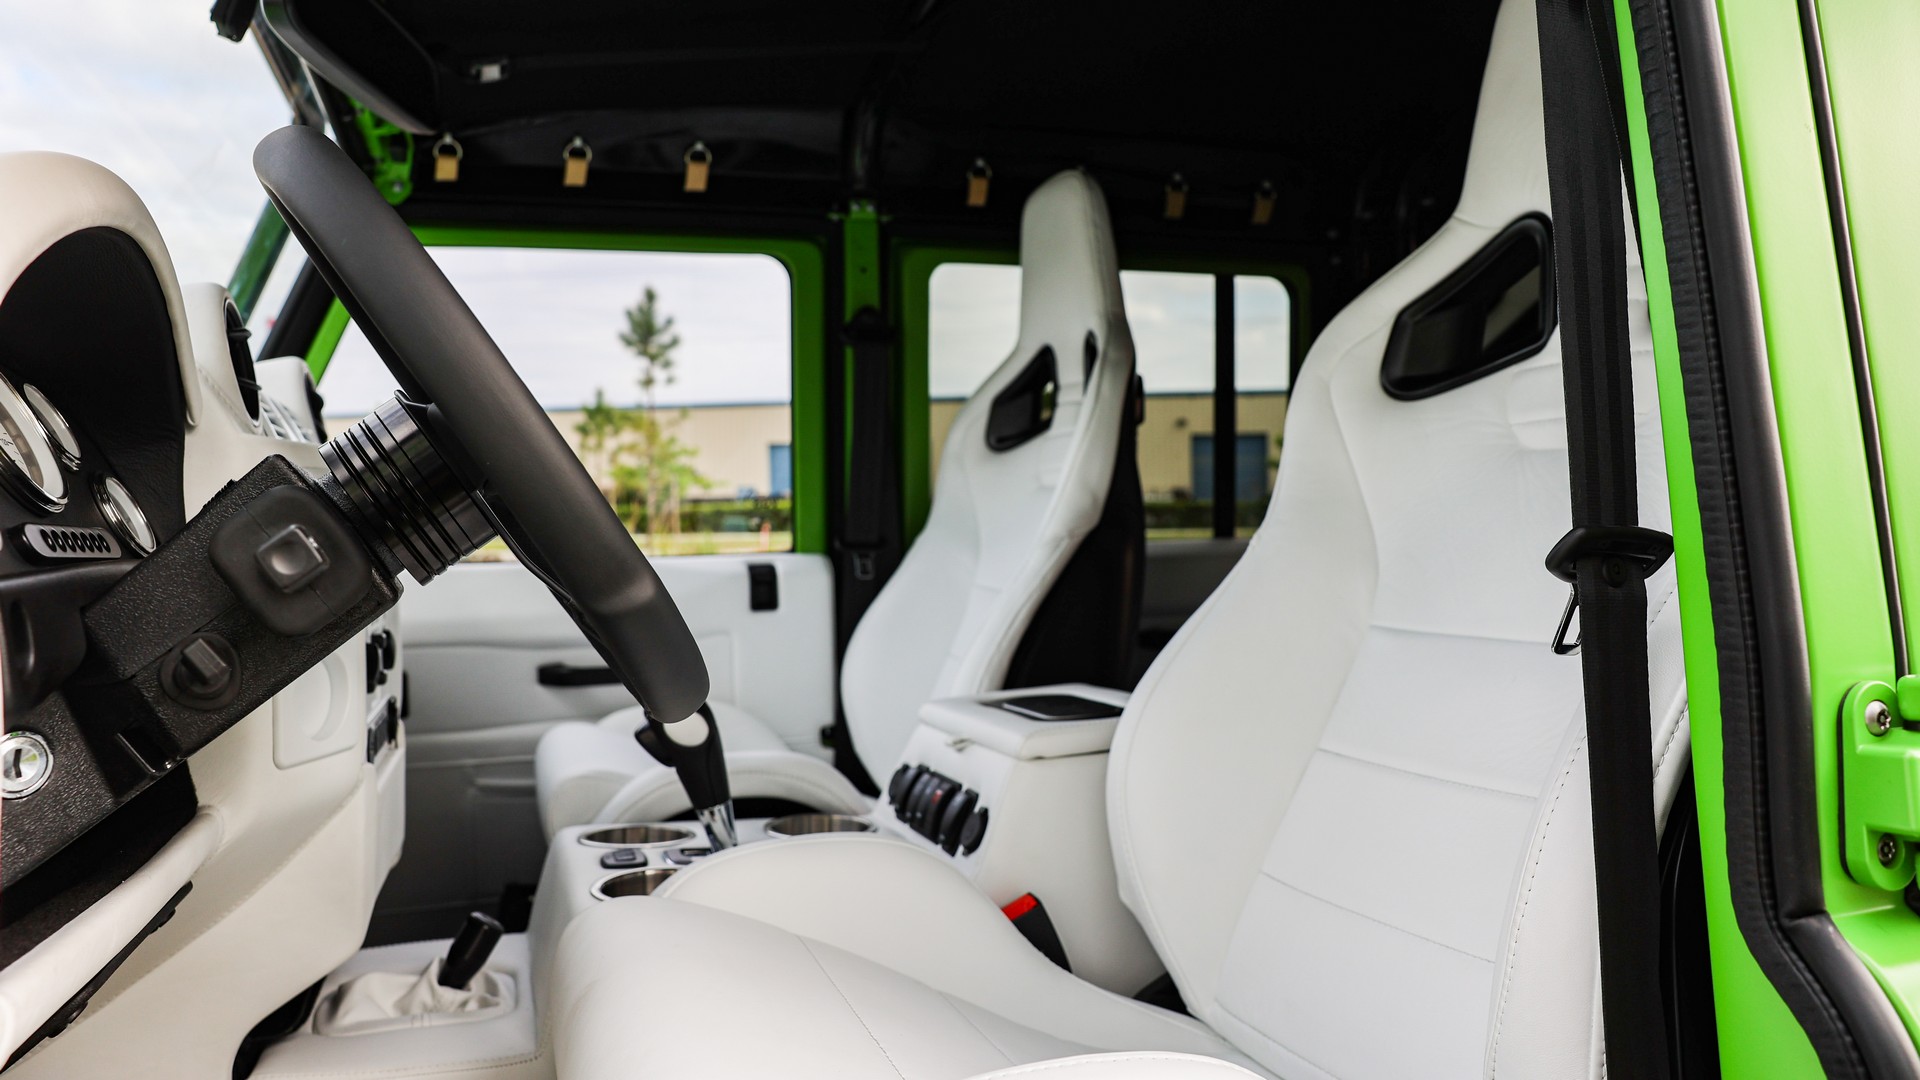 The LT1-powered Land Rover Defender in the Lamborghini Verde Mantis is, of course, a unique restaurant.